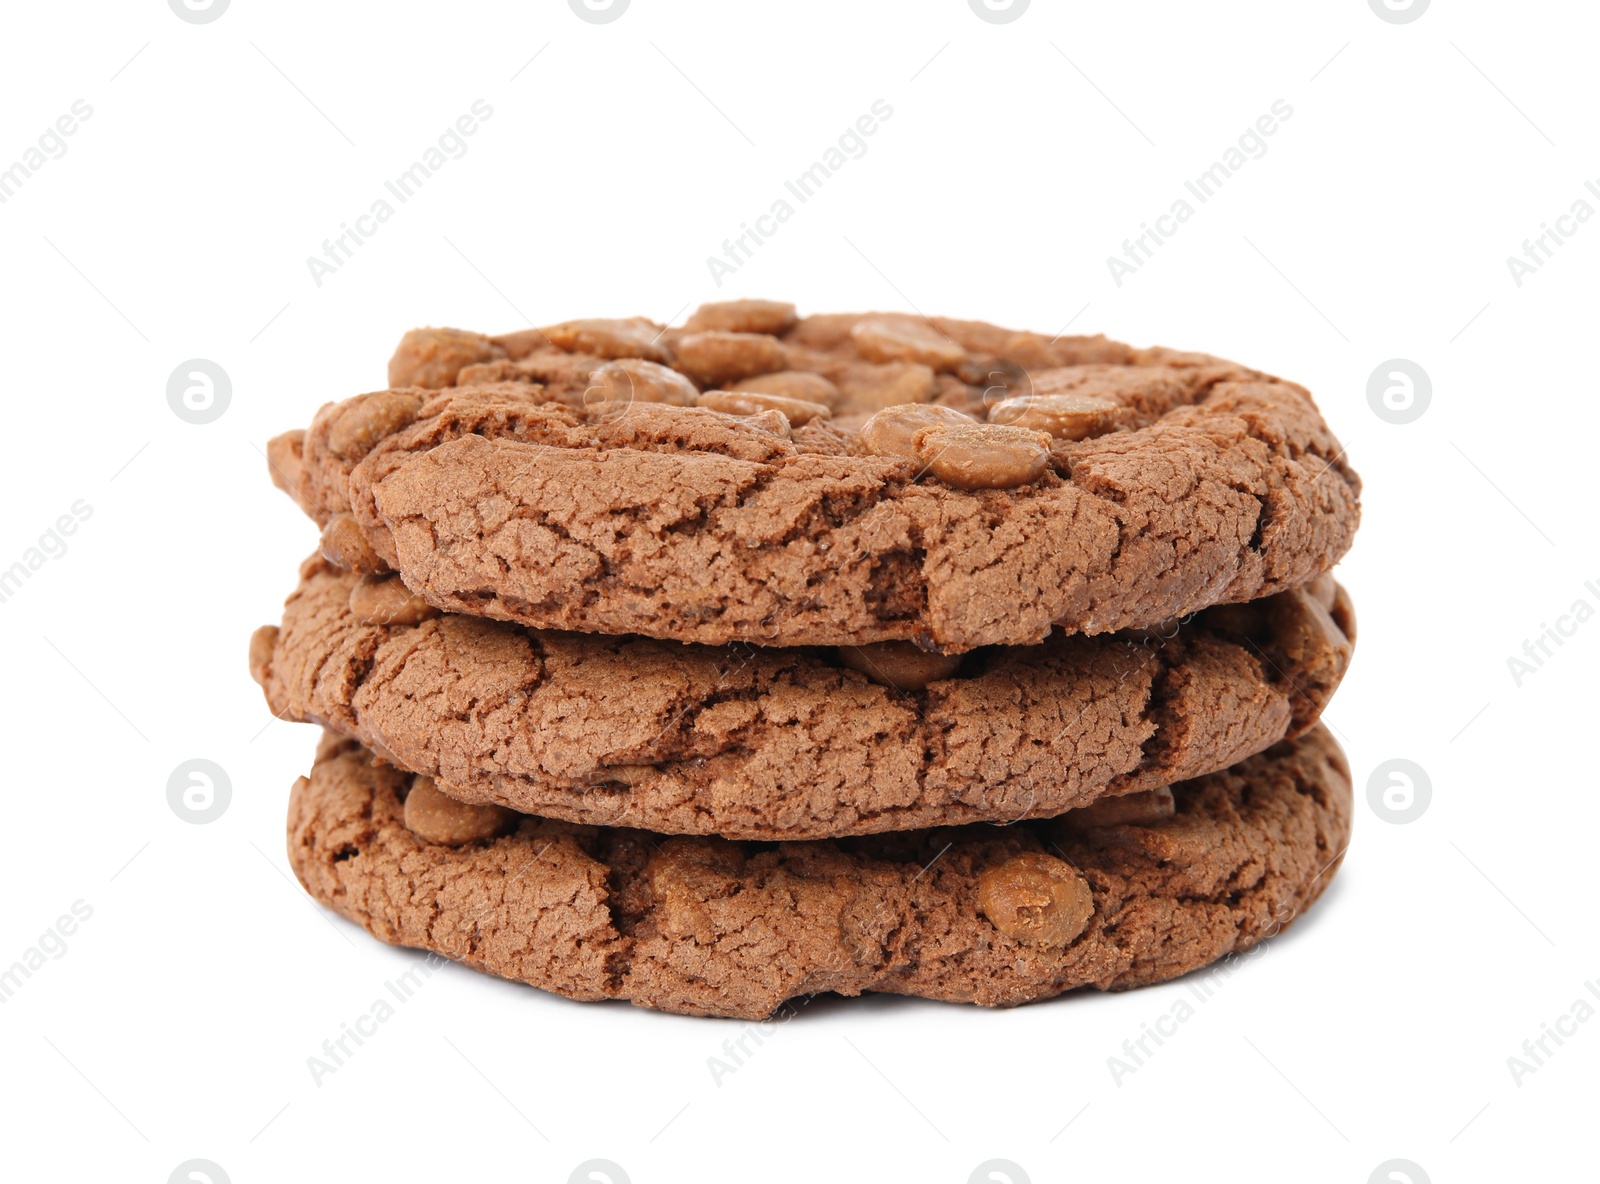 Photo of Stack of delicious chocolate chip cookies on white background